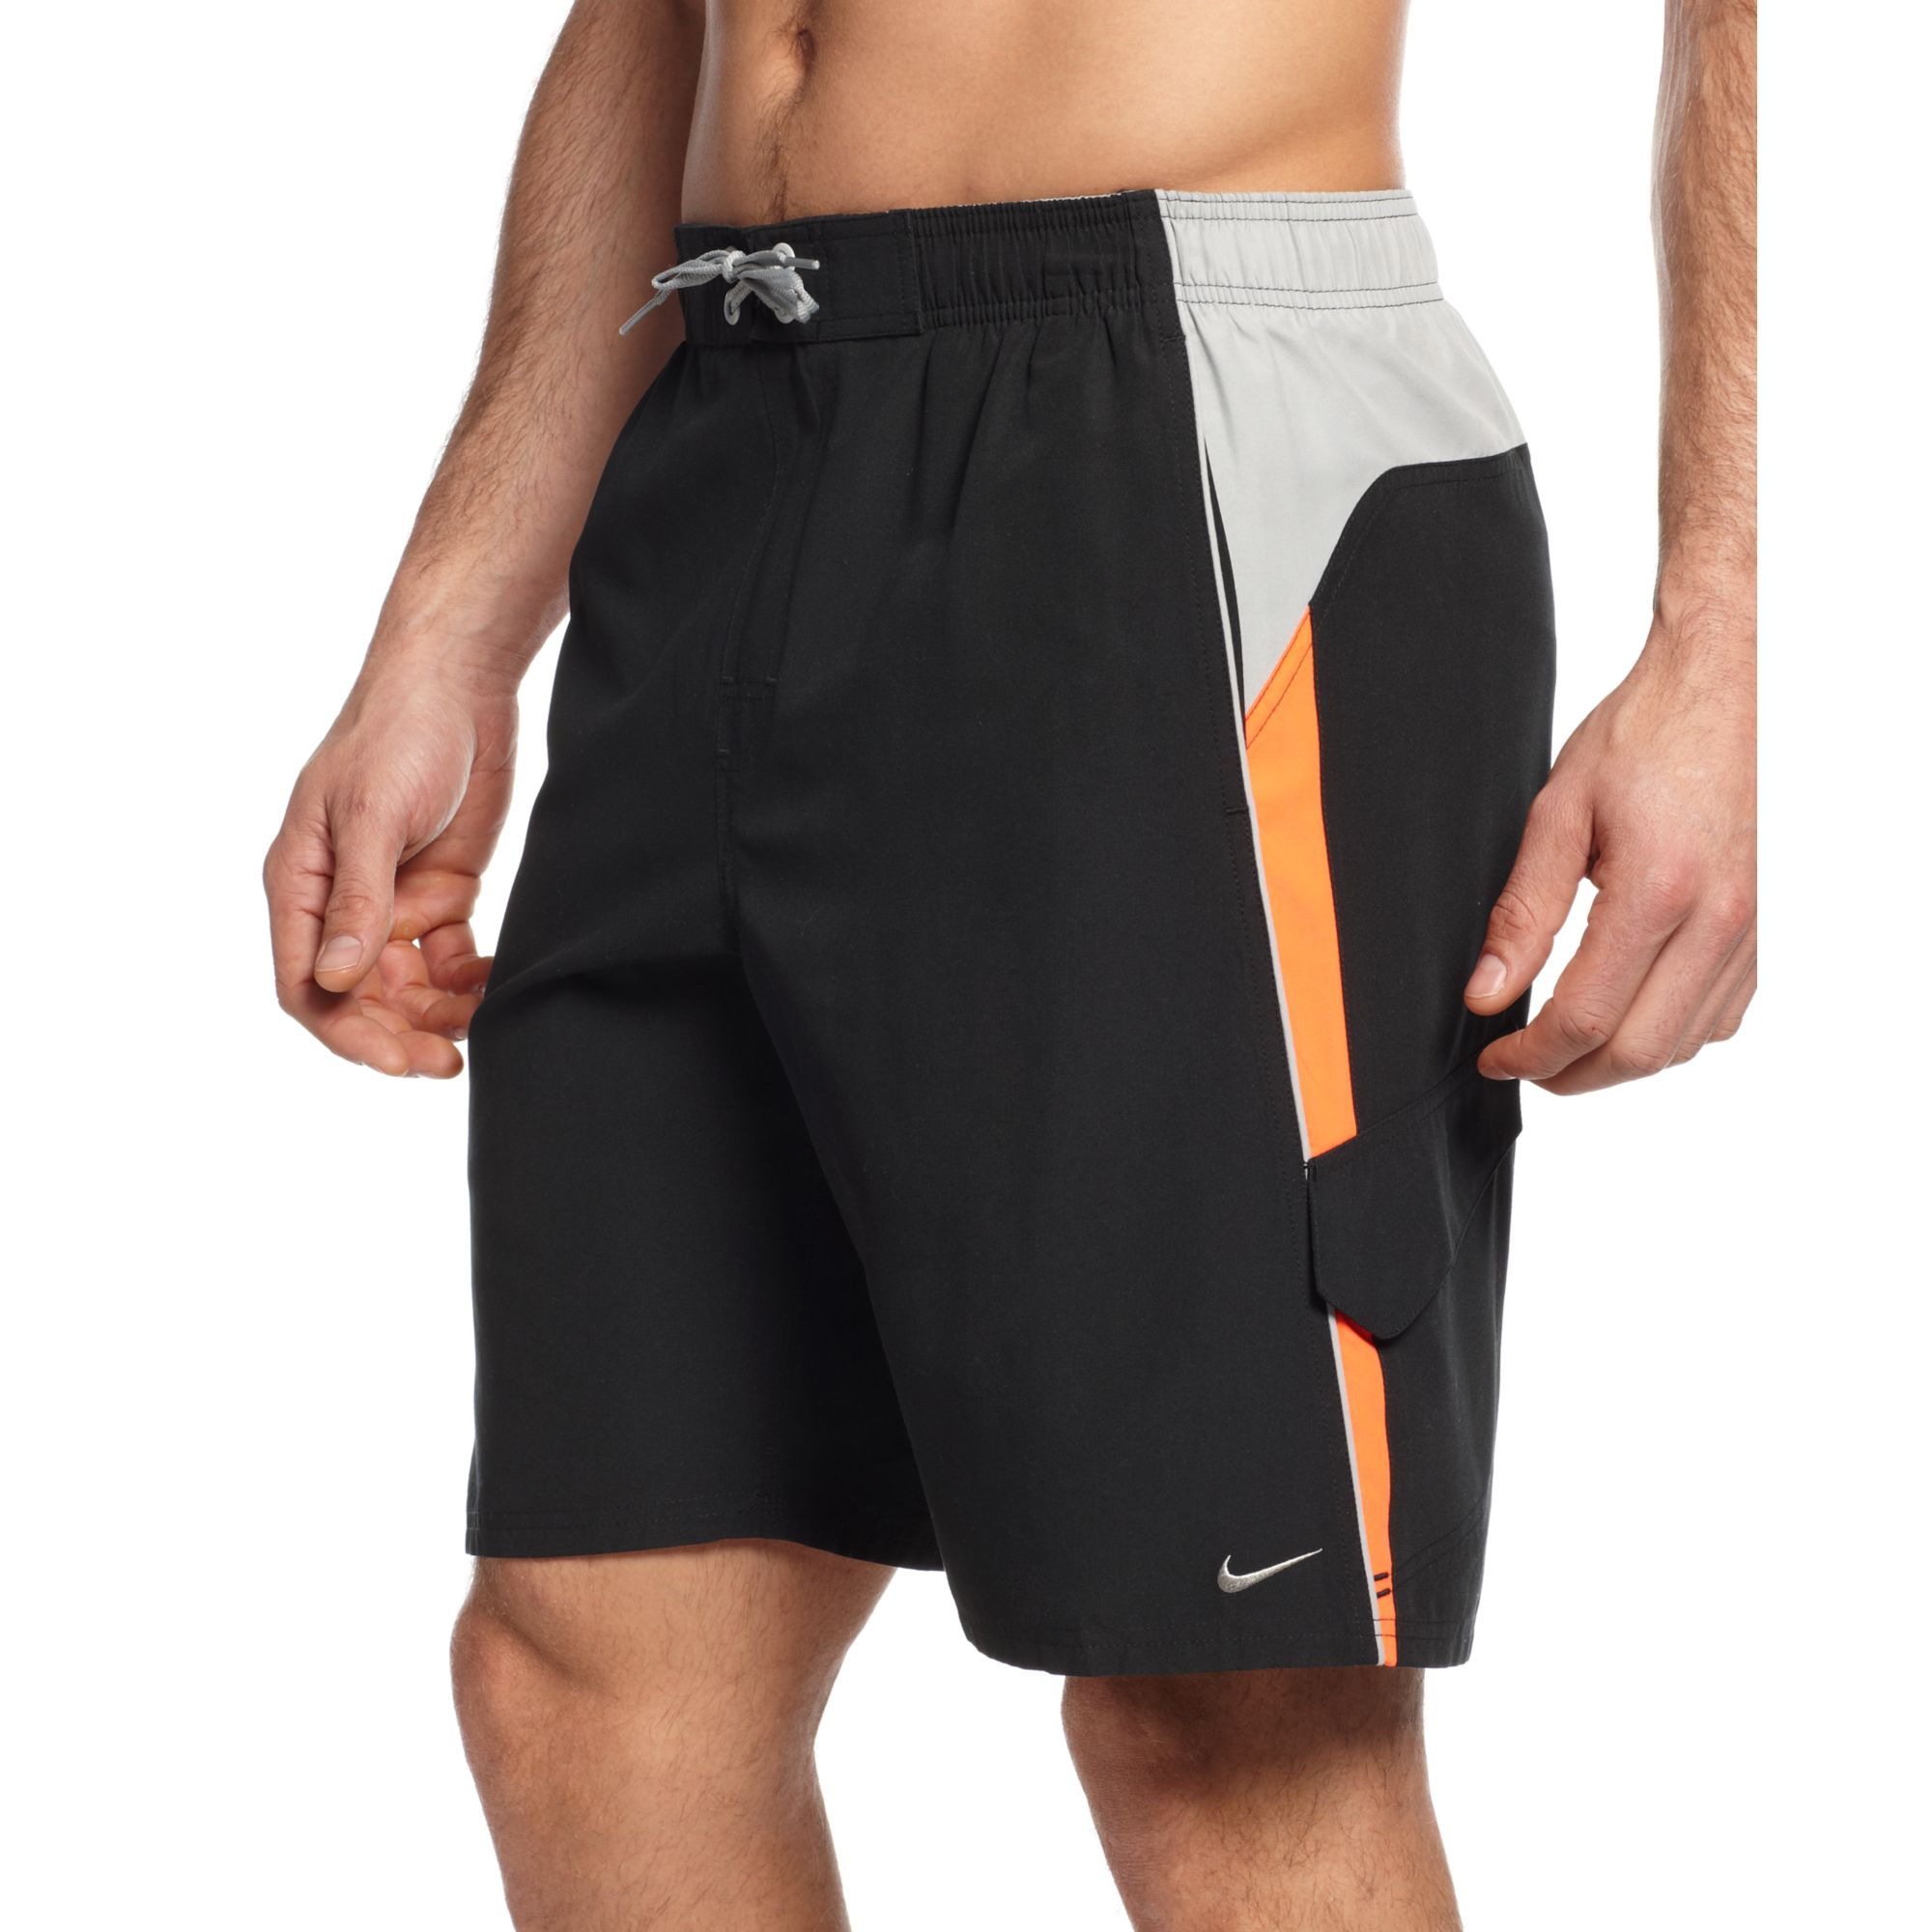 Lyst - Nike Core Colorblocked 9 Volley Boardshorts in Black for Men